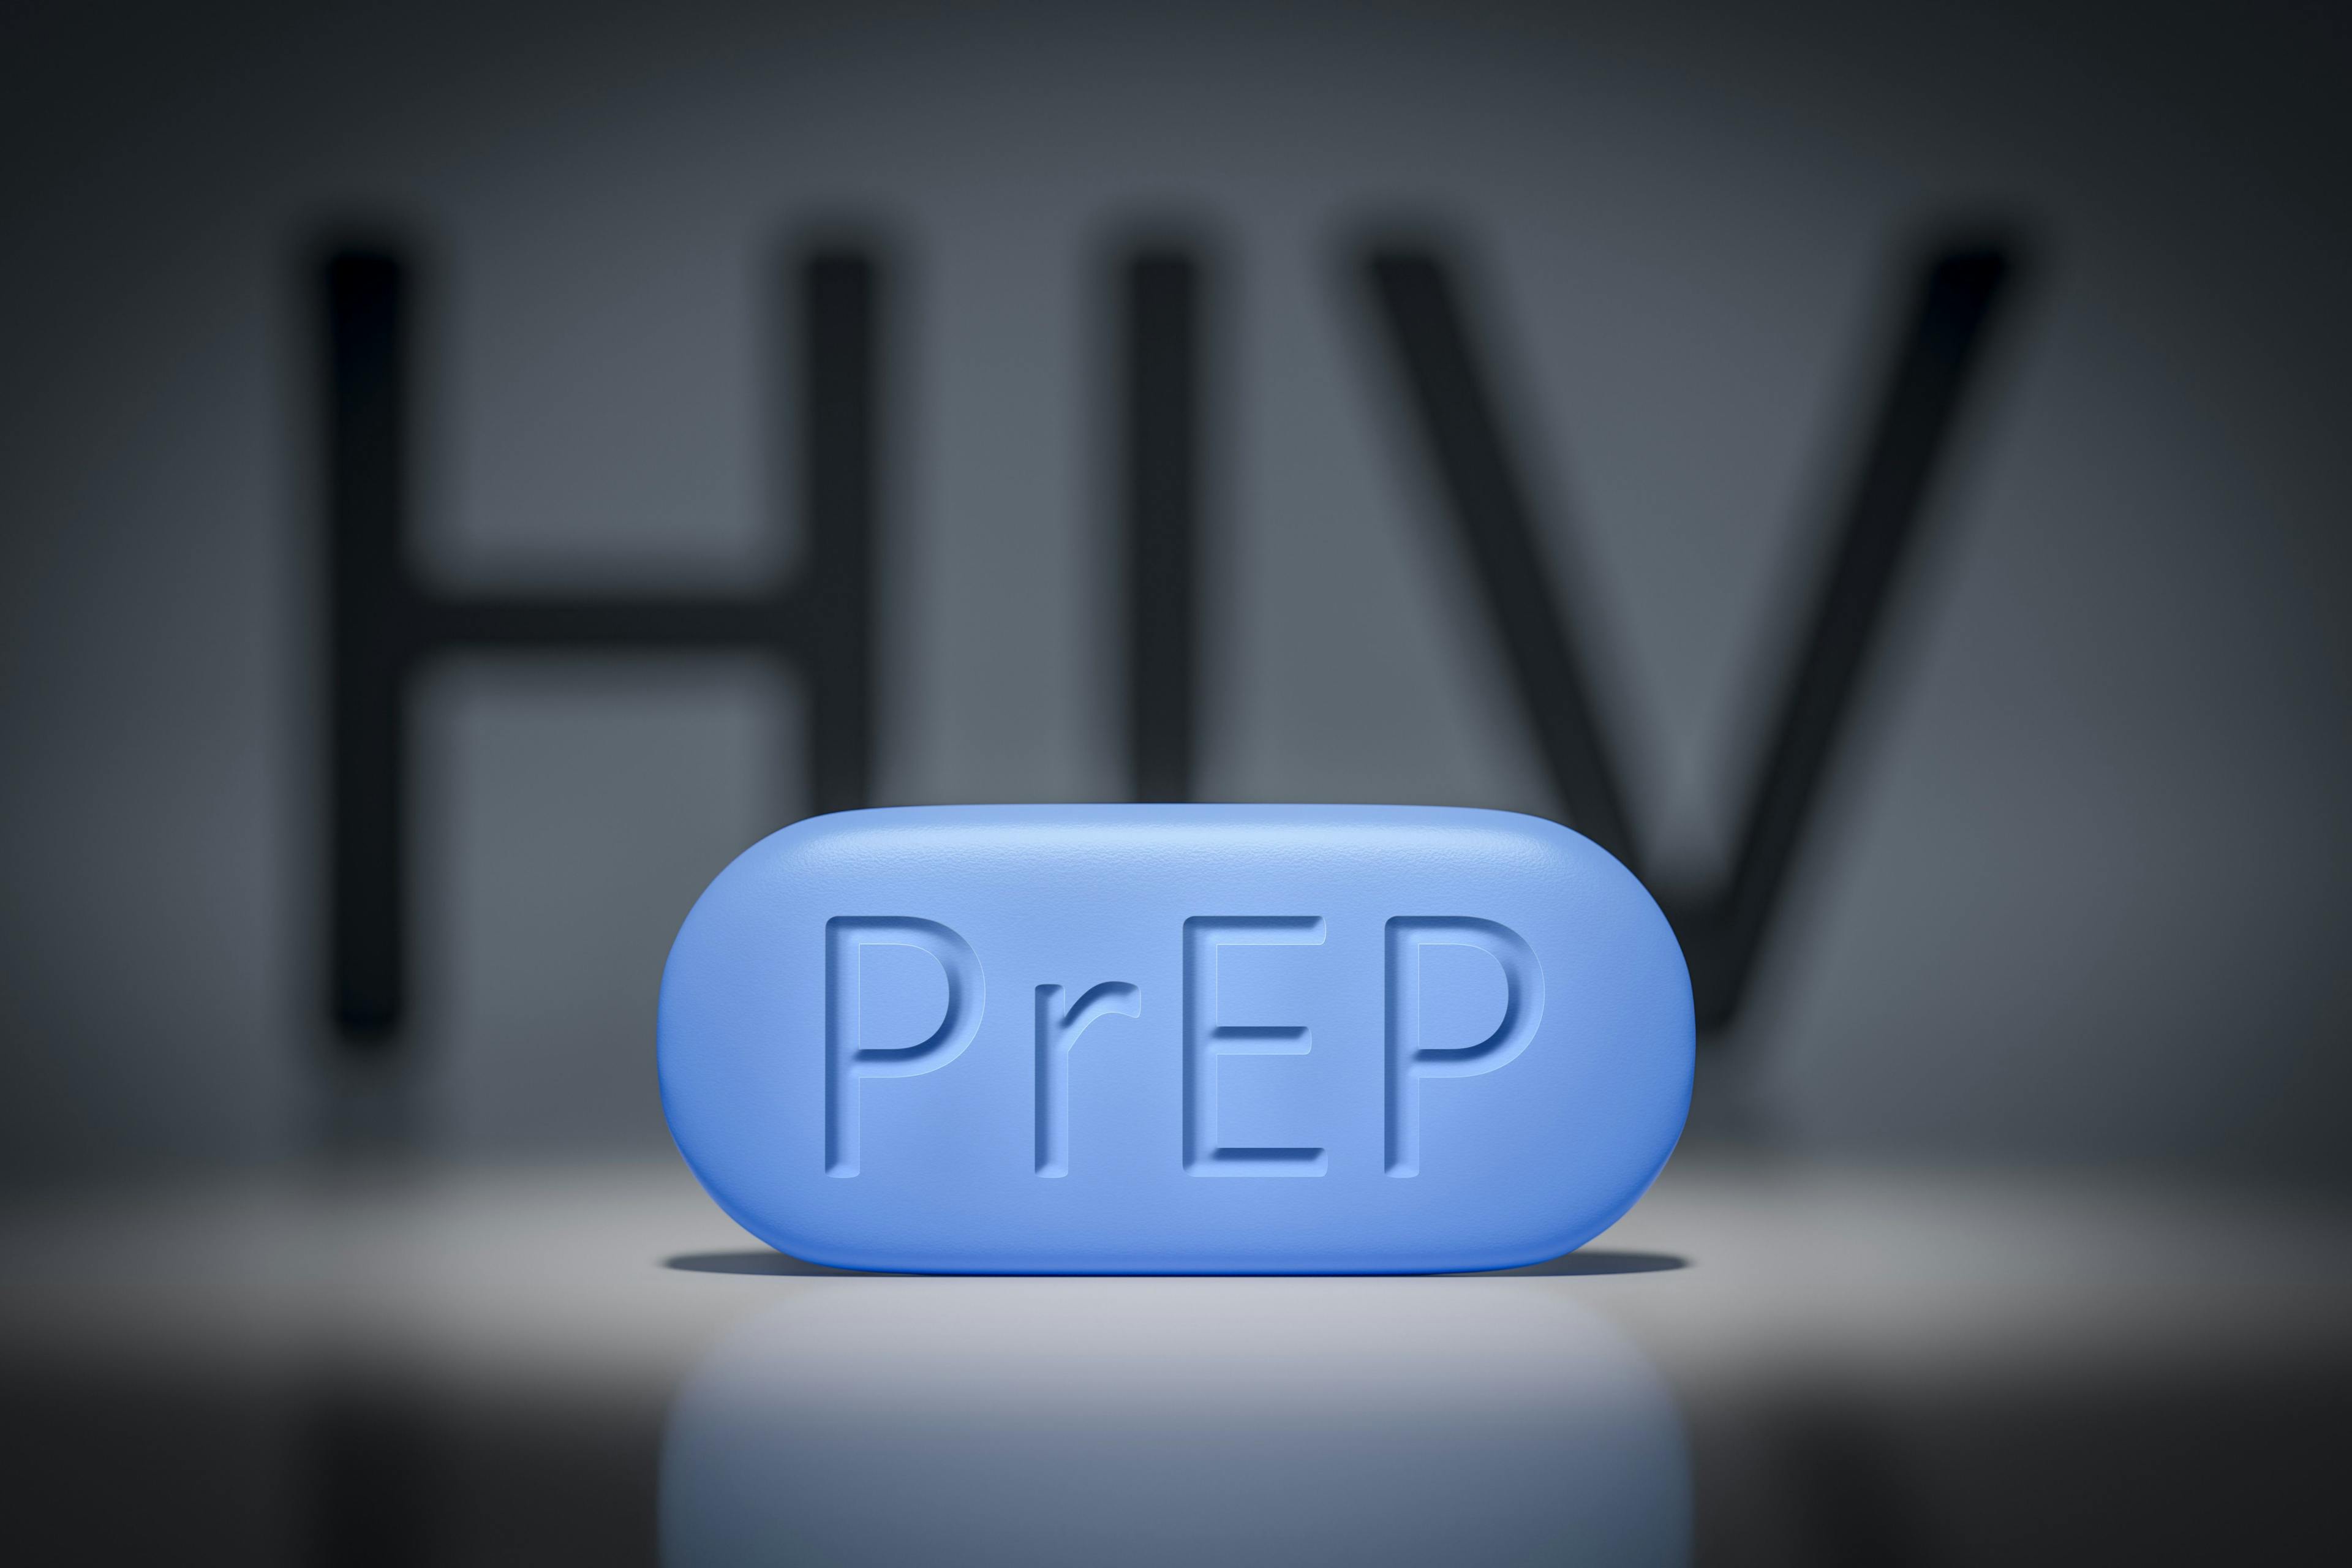 Will Descovy Undermine Efforts to End the HIV Epidemic?